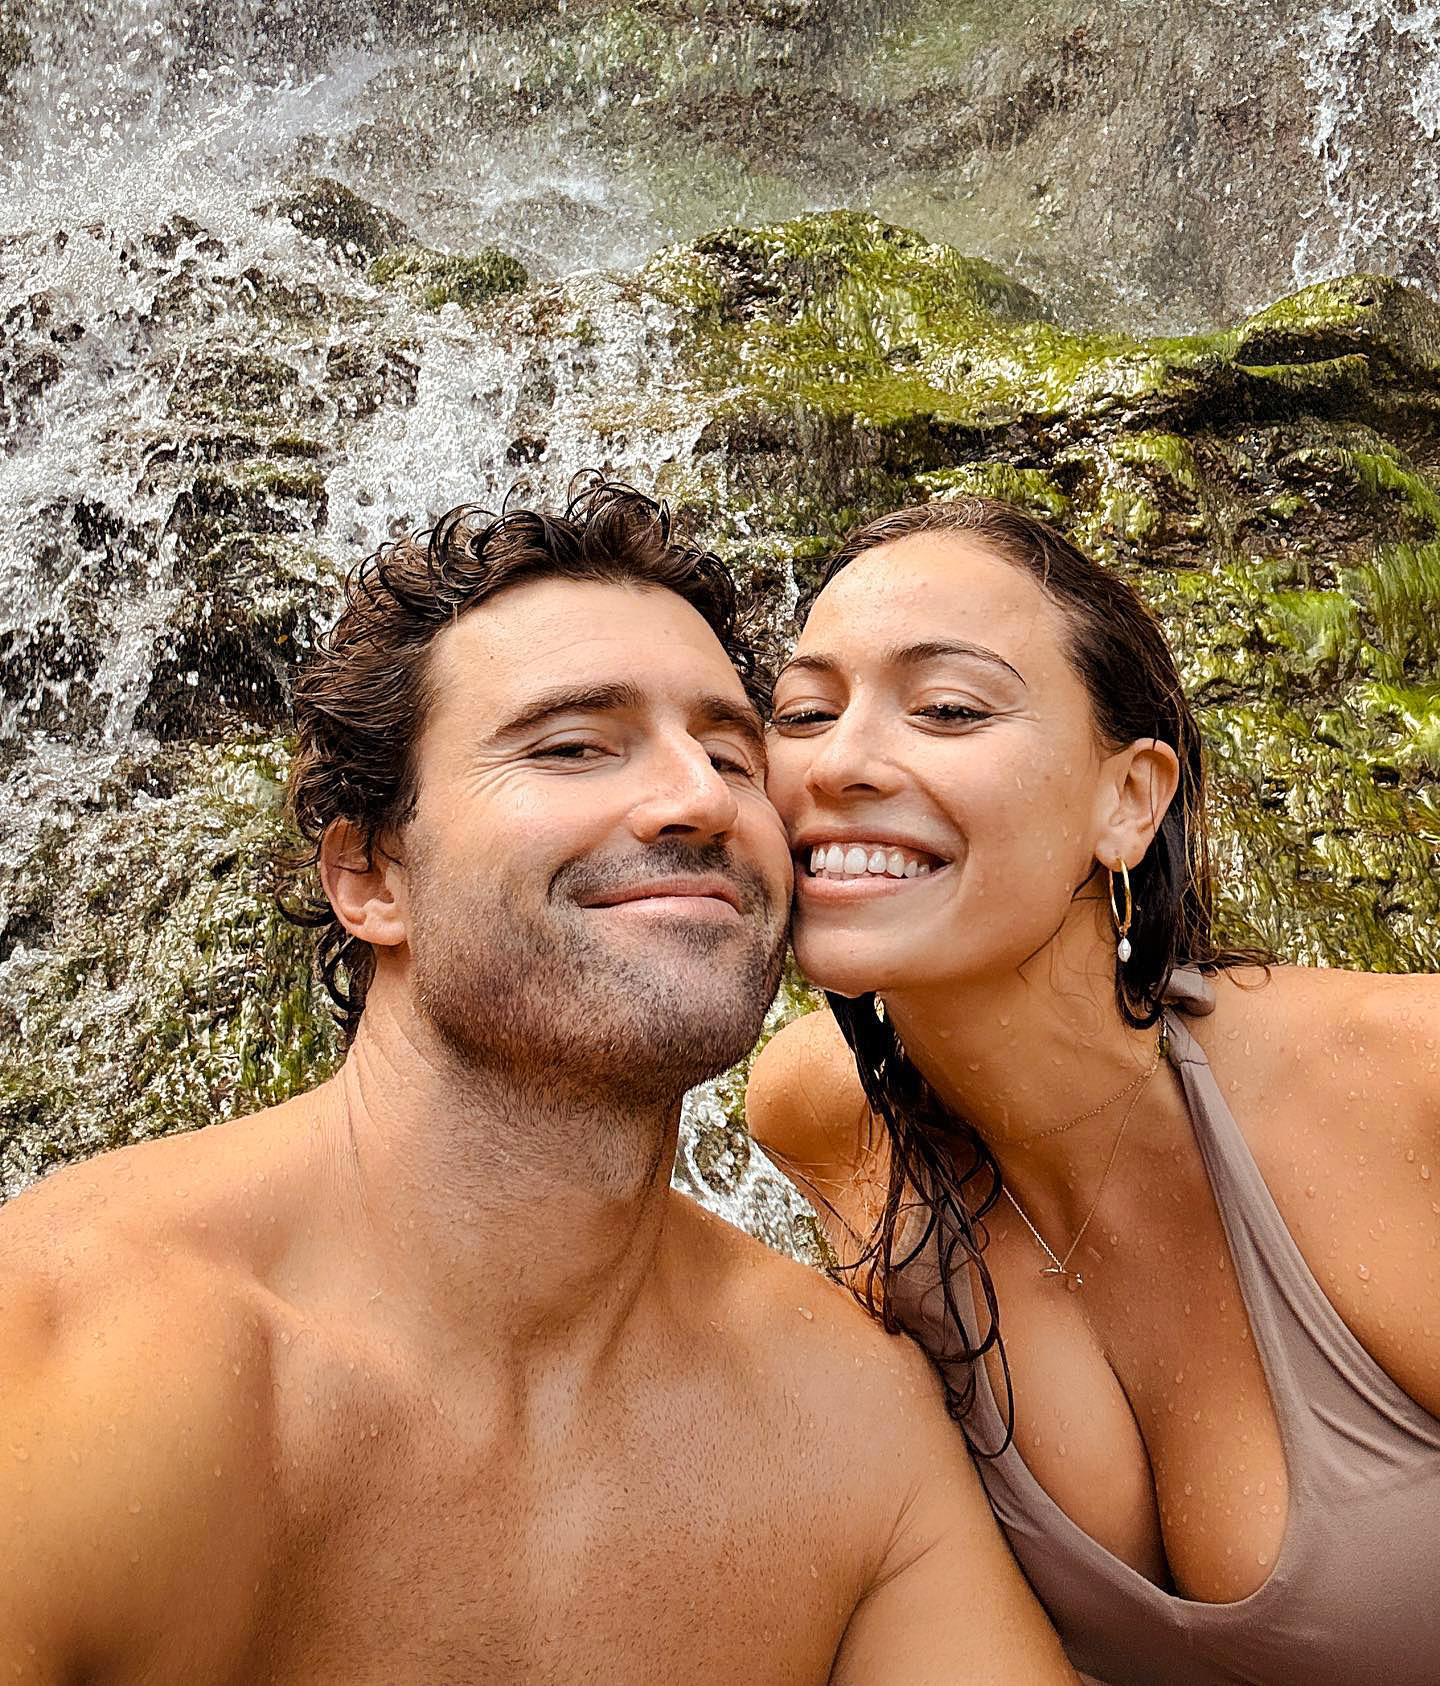 Who Is Brody Jenner's Fiancée? All About Tia Blanco